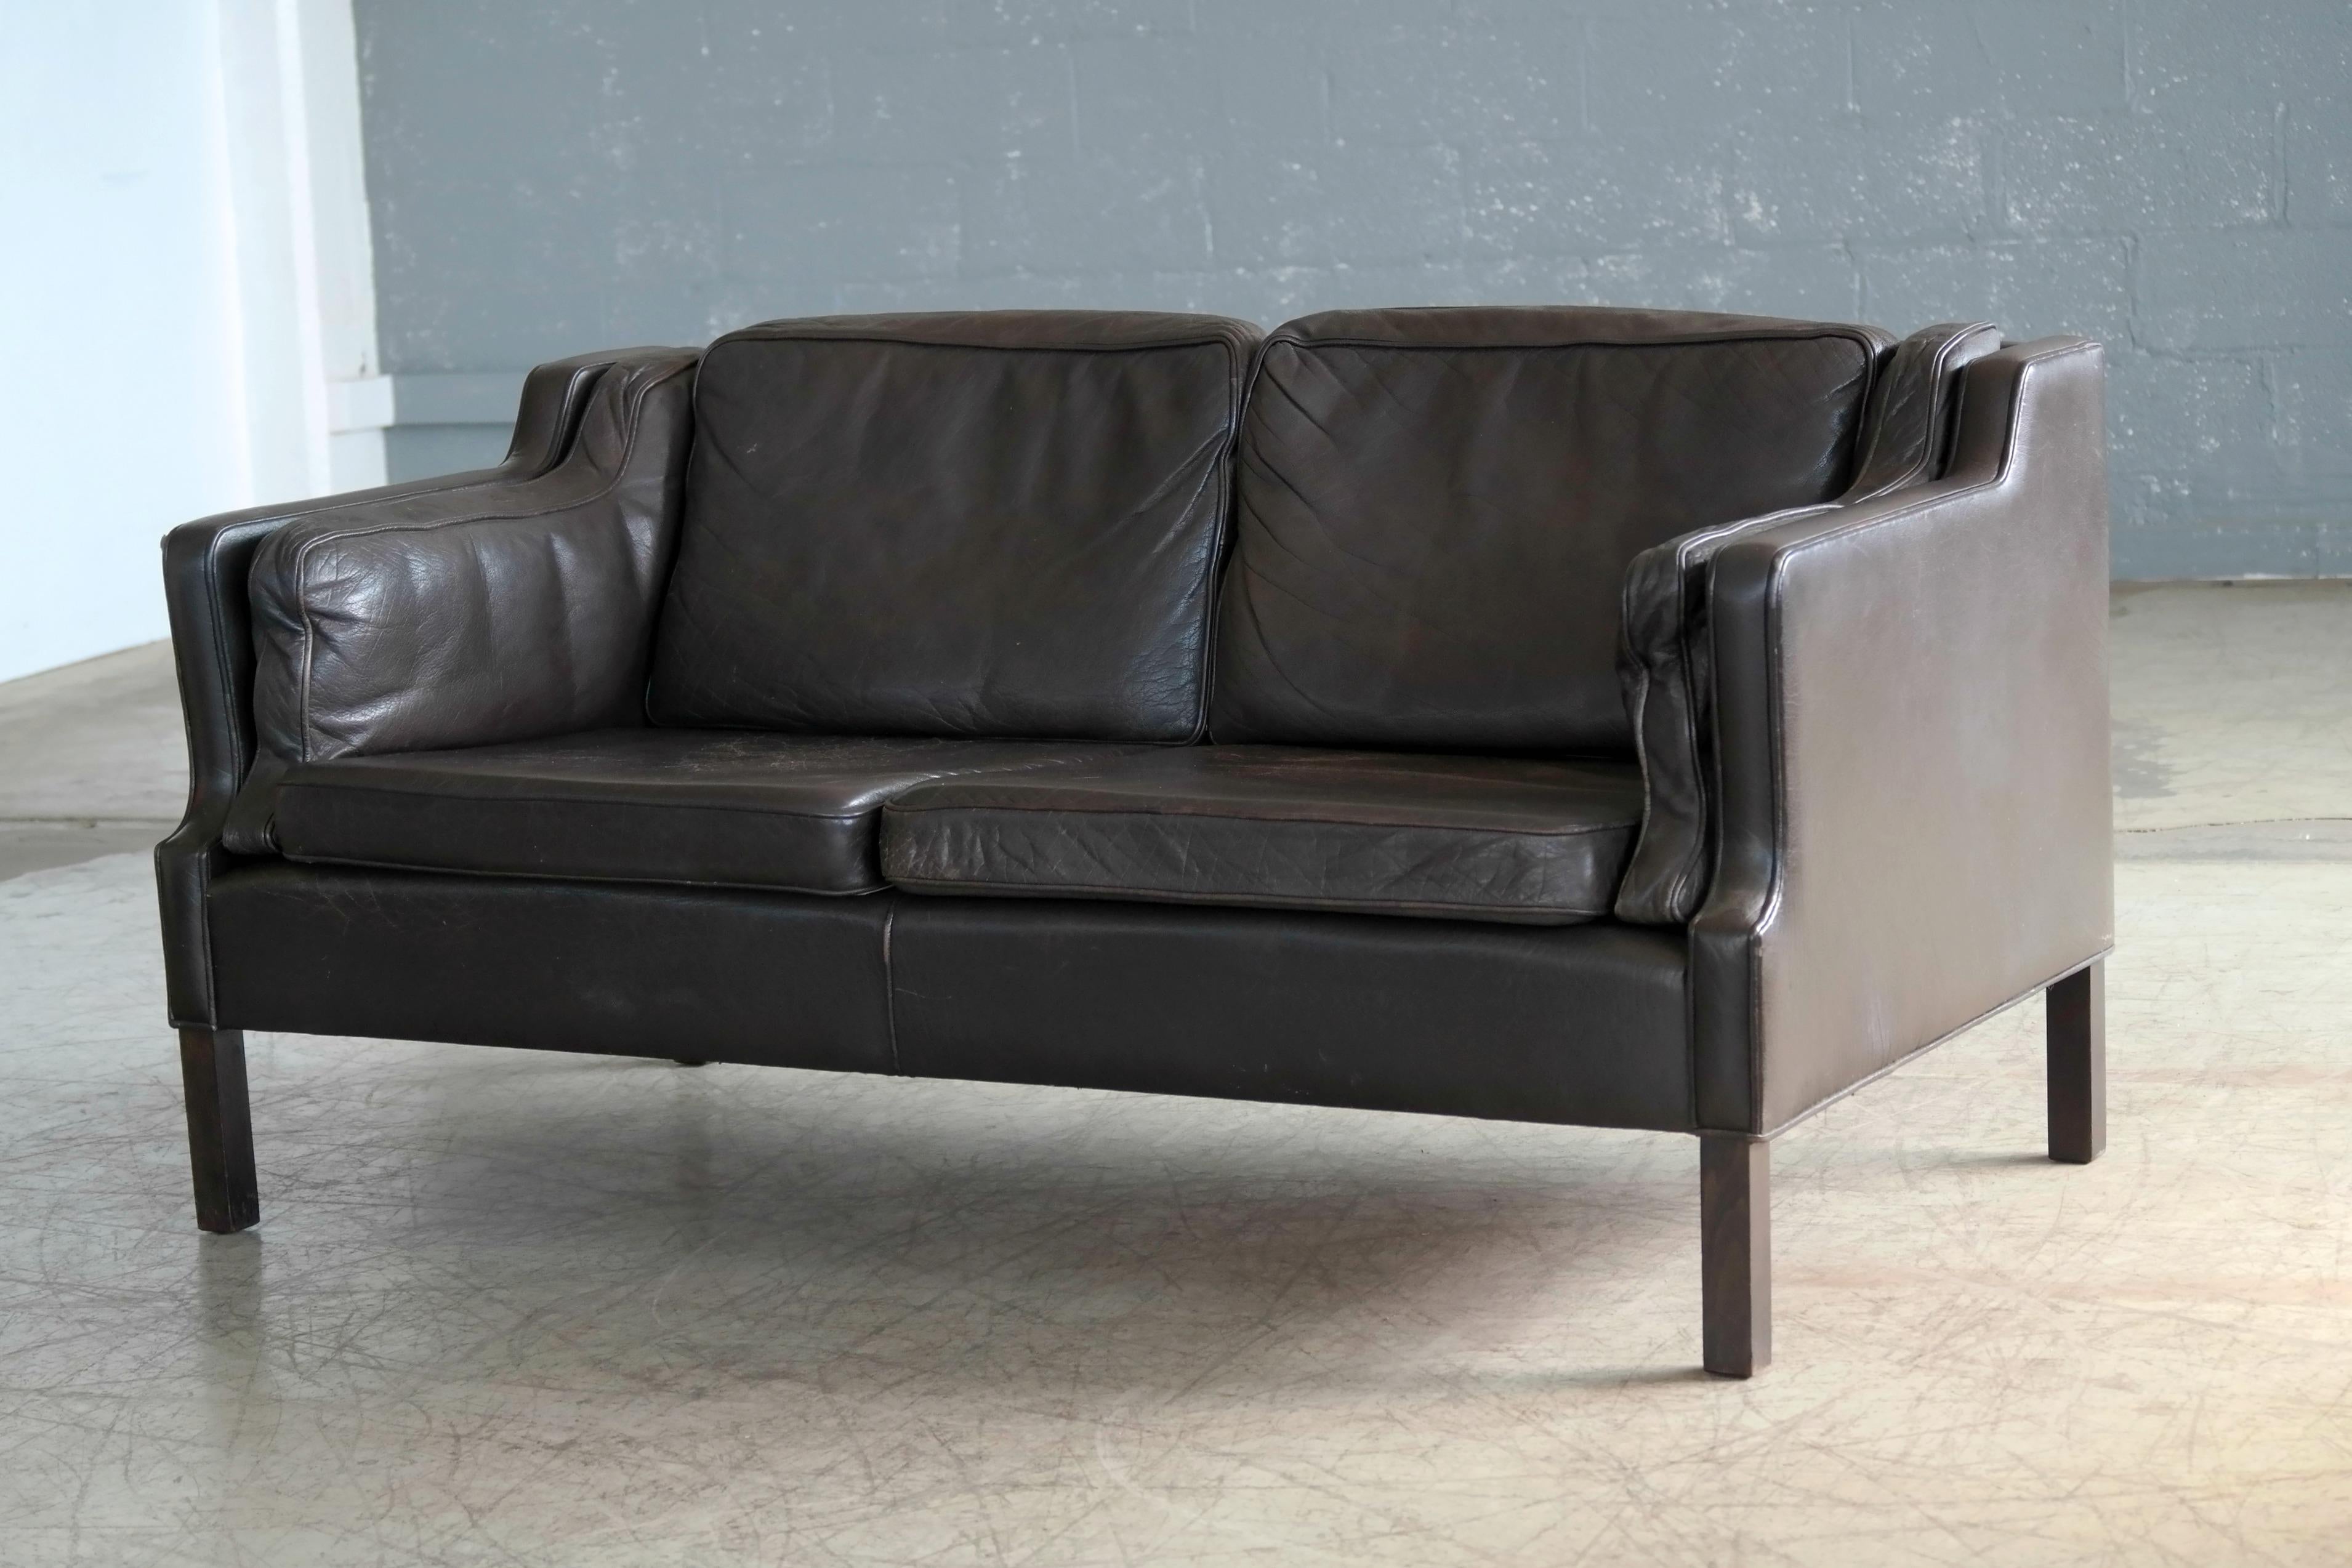 Classic Børge Mogensen style loveseat in dark brown colored buffalo leather designed by Georg Thams for Vejen Polster Møbelfabrik, Denmark. Very nice quality leather with great patina and normal age wear. Seat cushions are foam filled and back